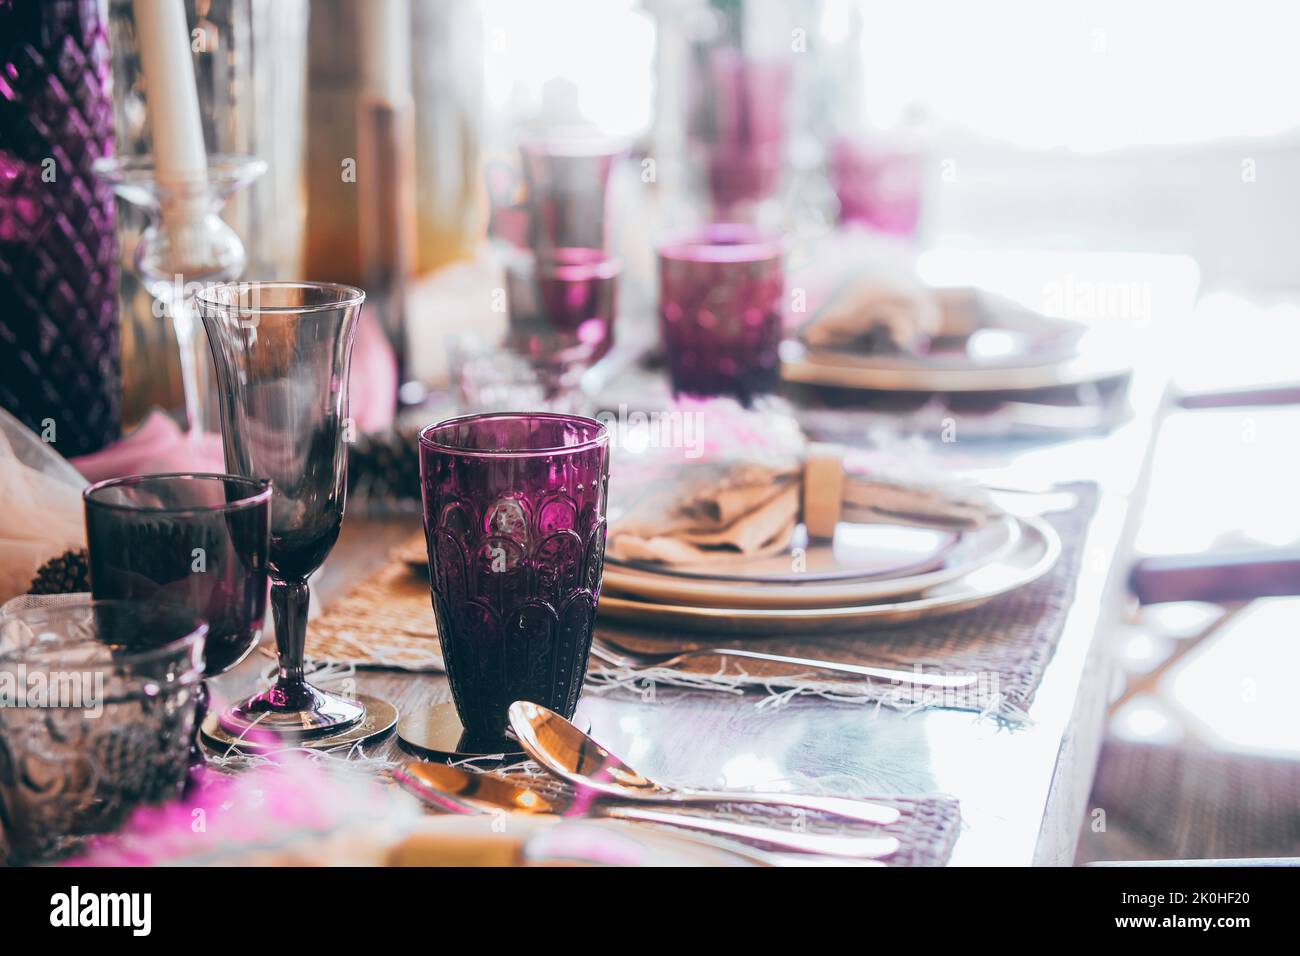 glass dishware on dining table. party banquet celebration Stock Photo